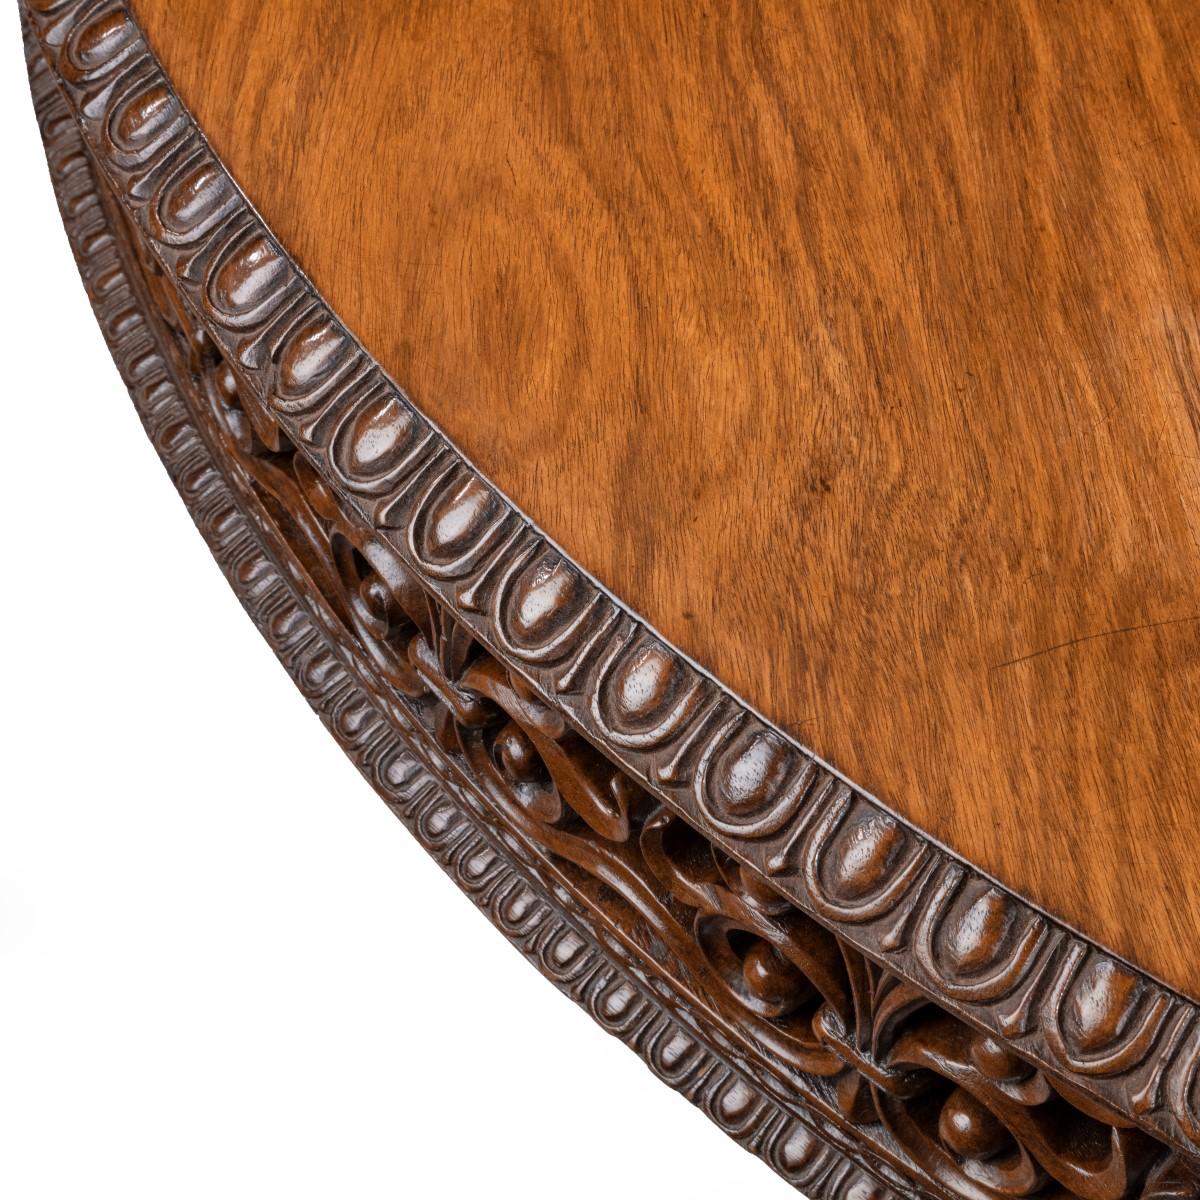 A William IV Colonial padouk five-foot round table